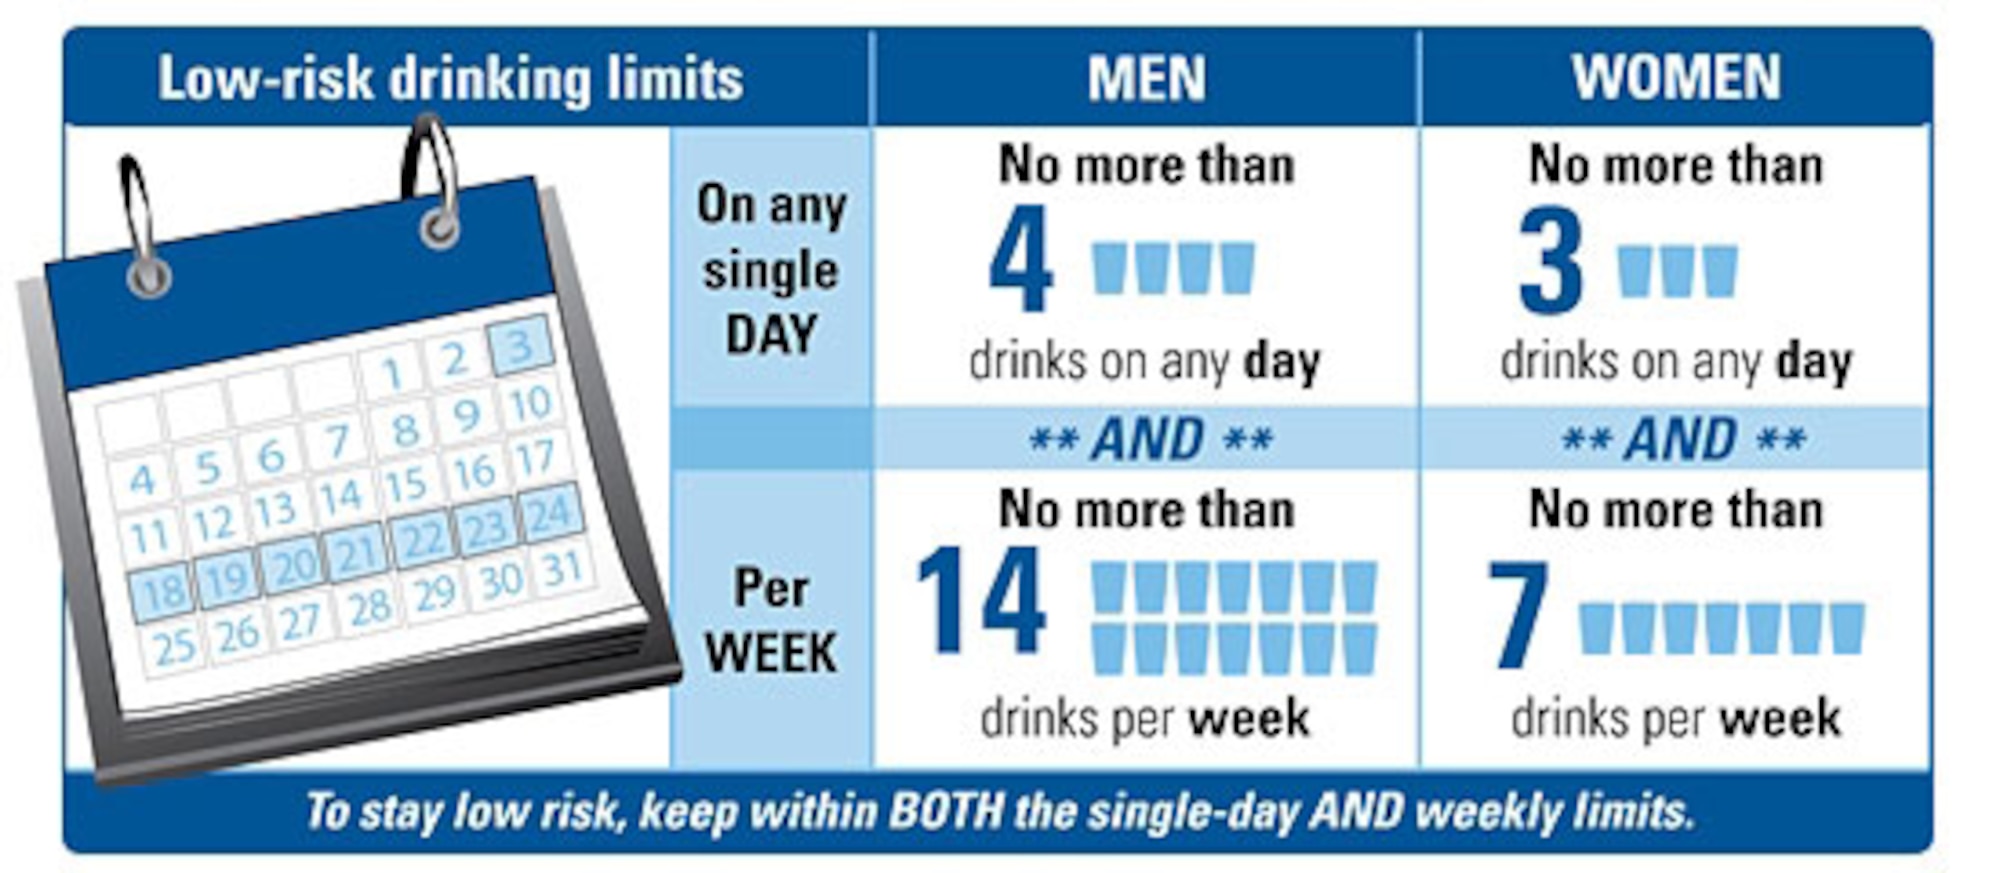 (Graphic courtesy of the National Institute of Alcohol Abuse and Alcoholism)
